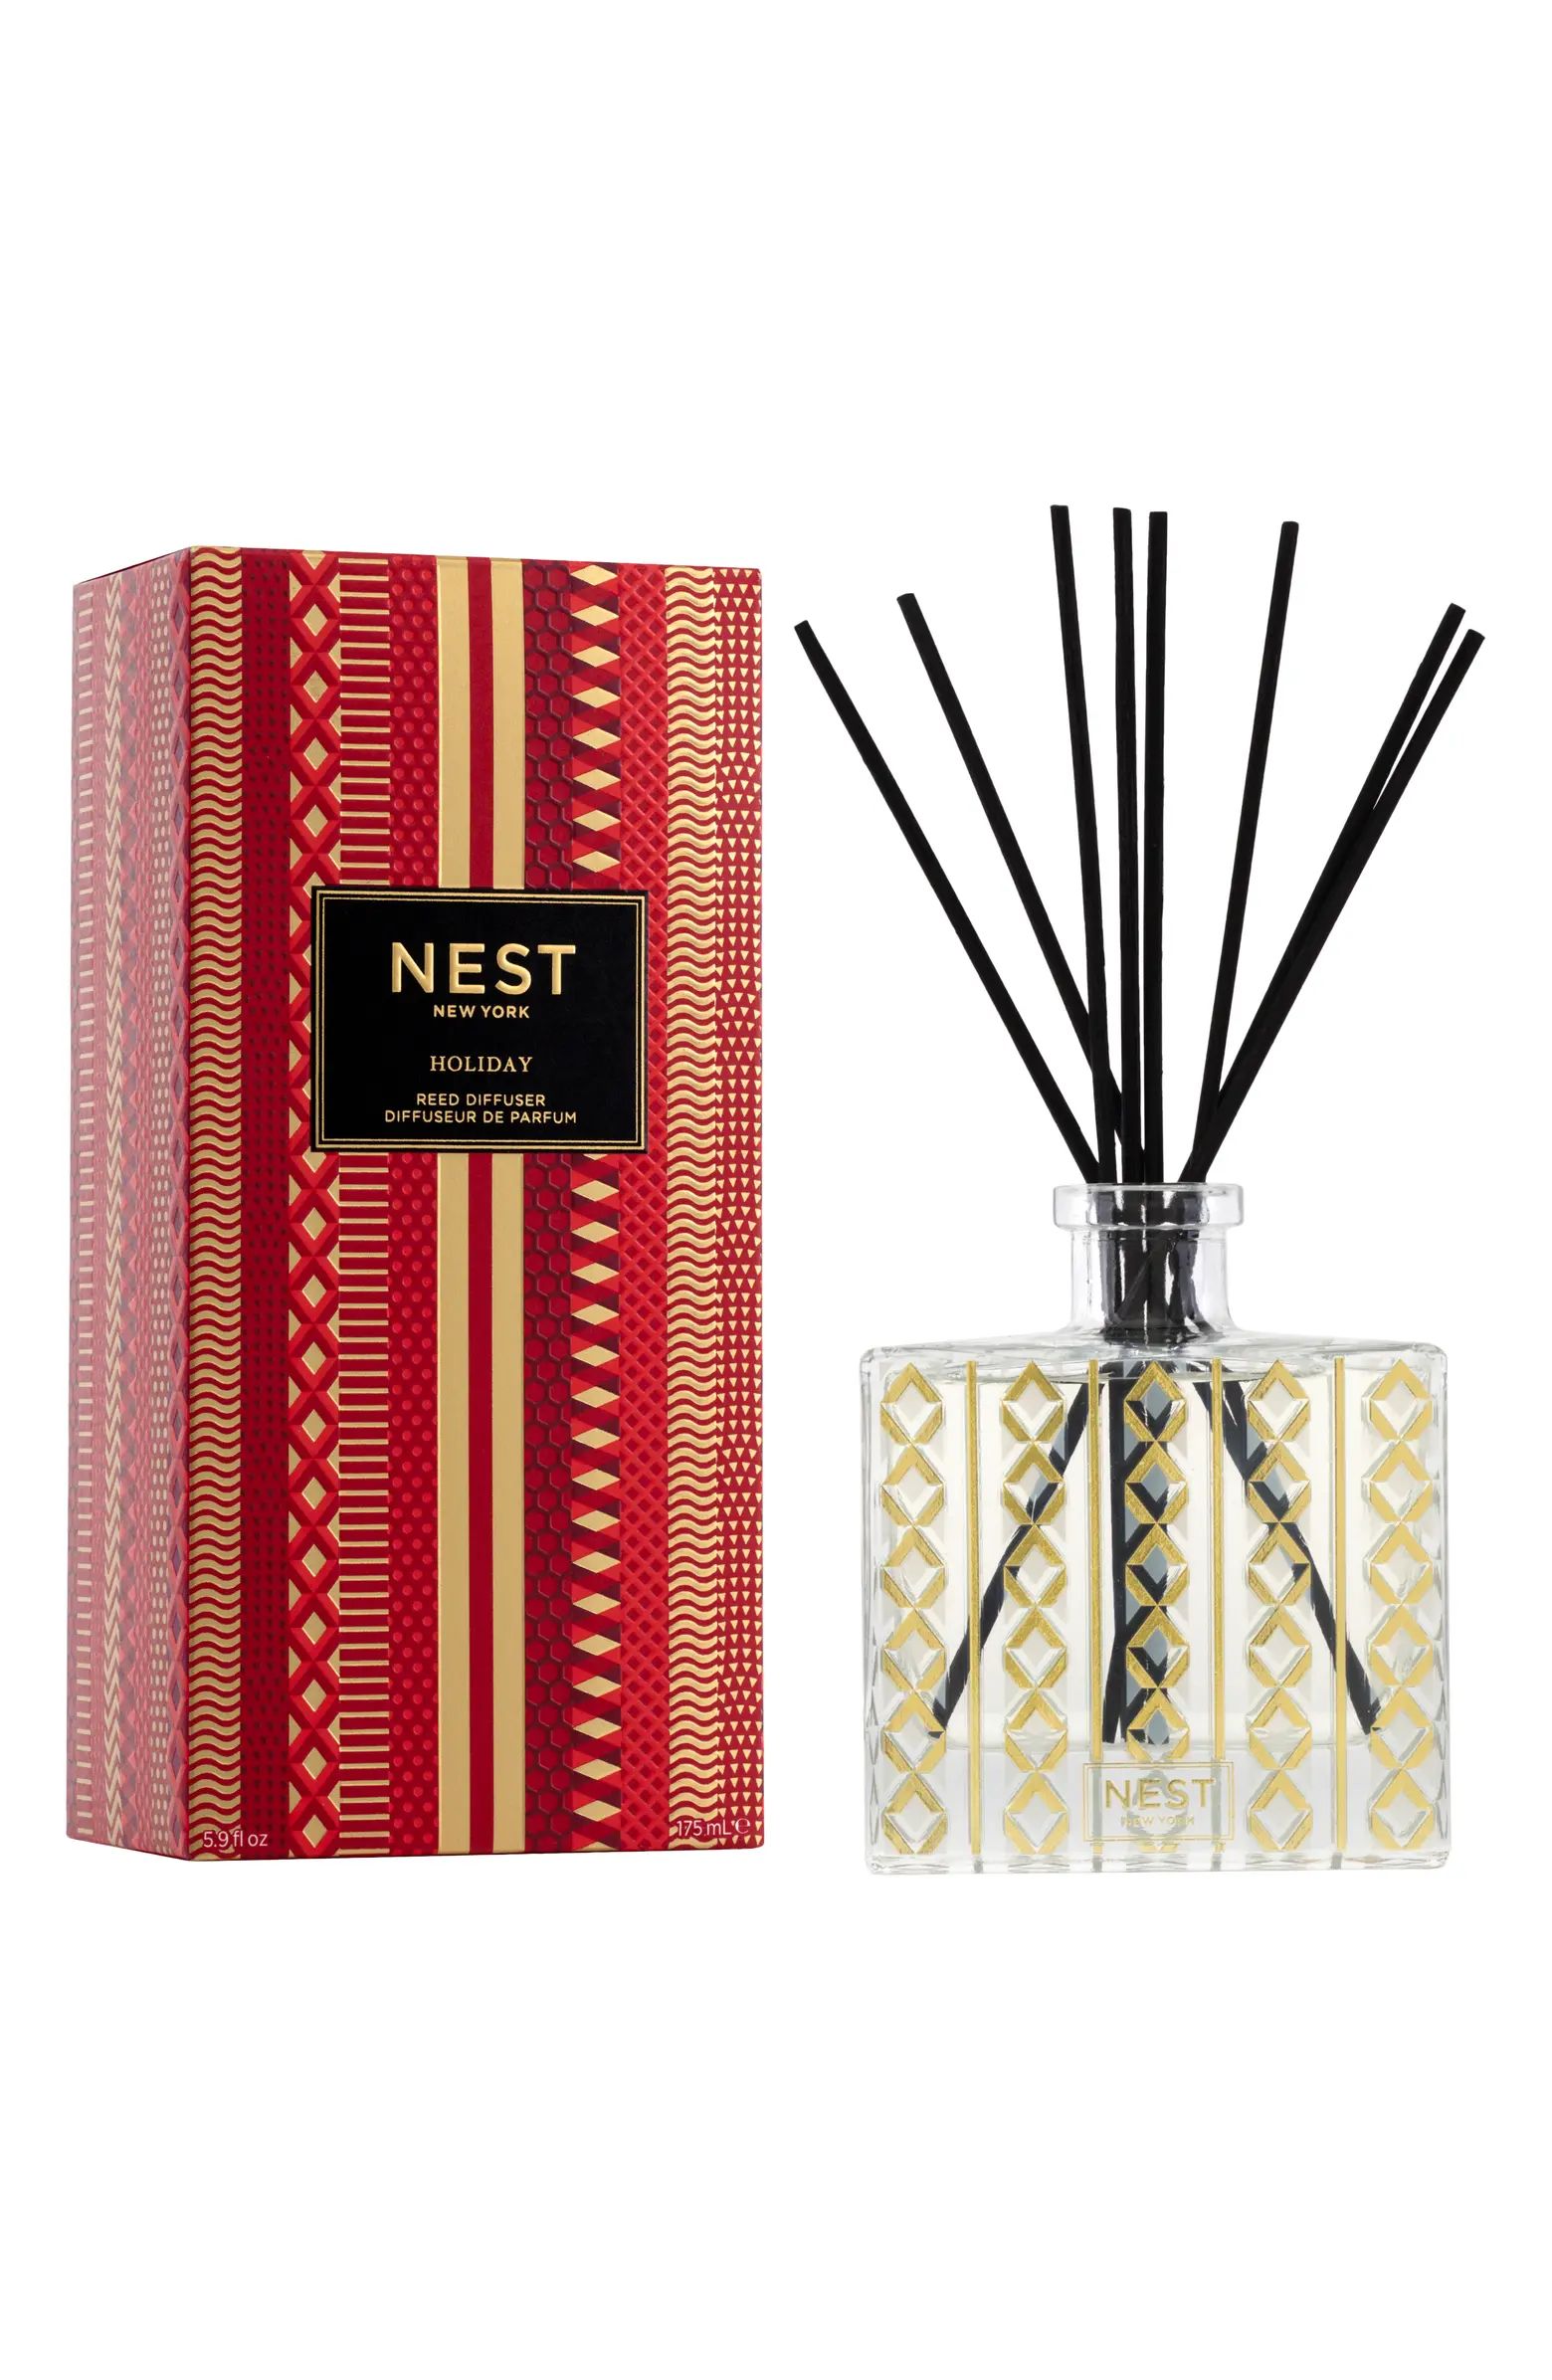 NEST Fragrances Holiday Reed Diffuser | Nordstrom